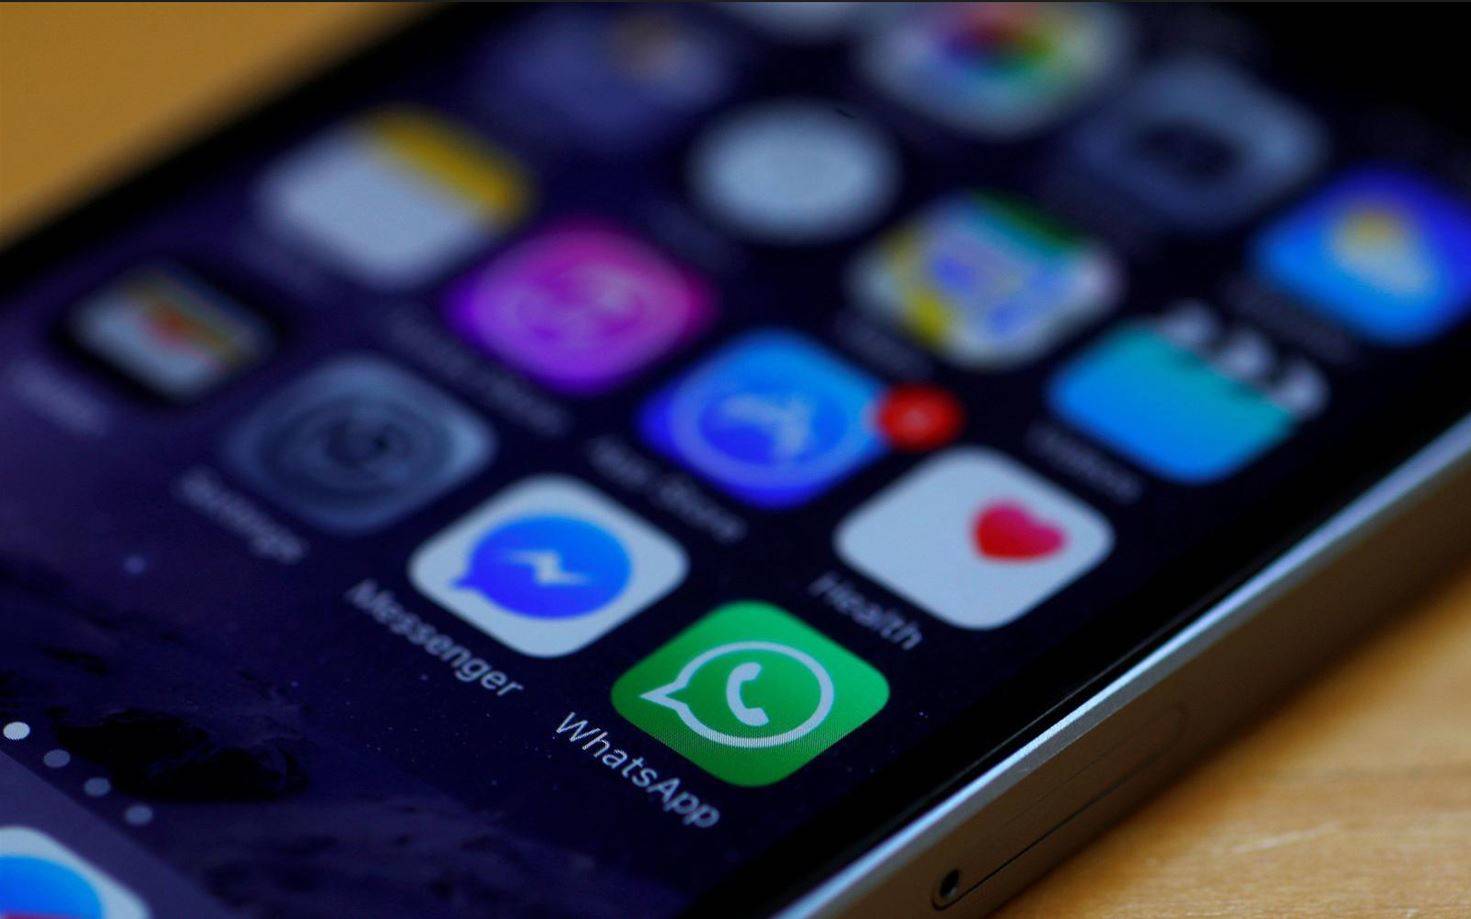 The Centre was responding to a petition on privacy concerns following a change in WhatsApp’s policy after its takeover by FB.